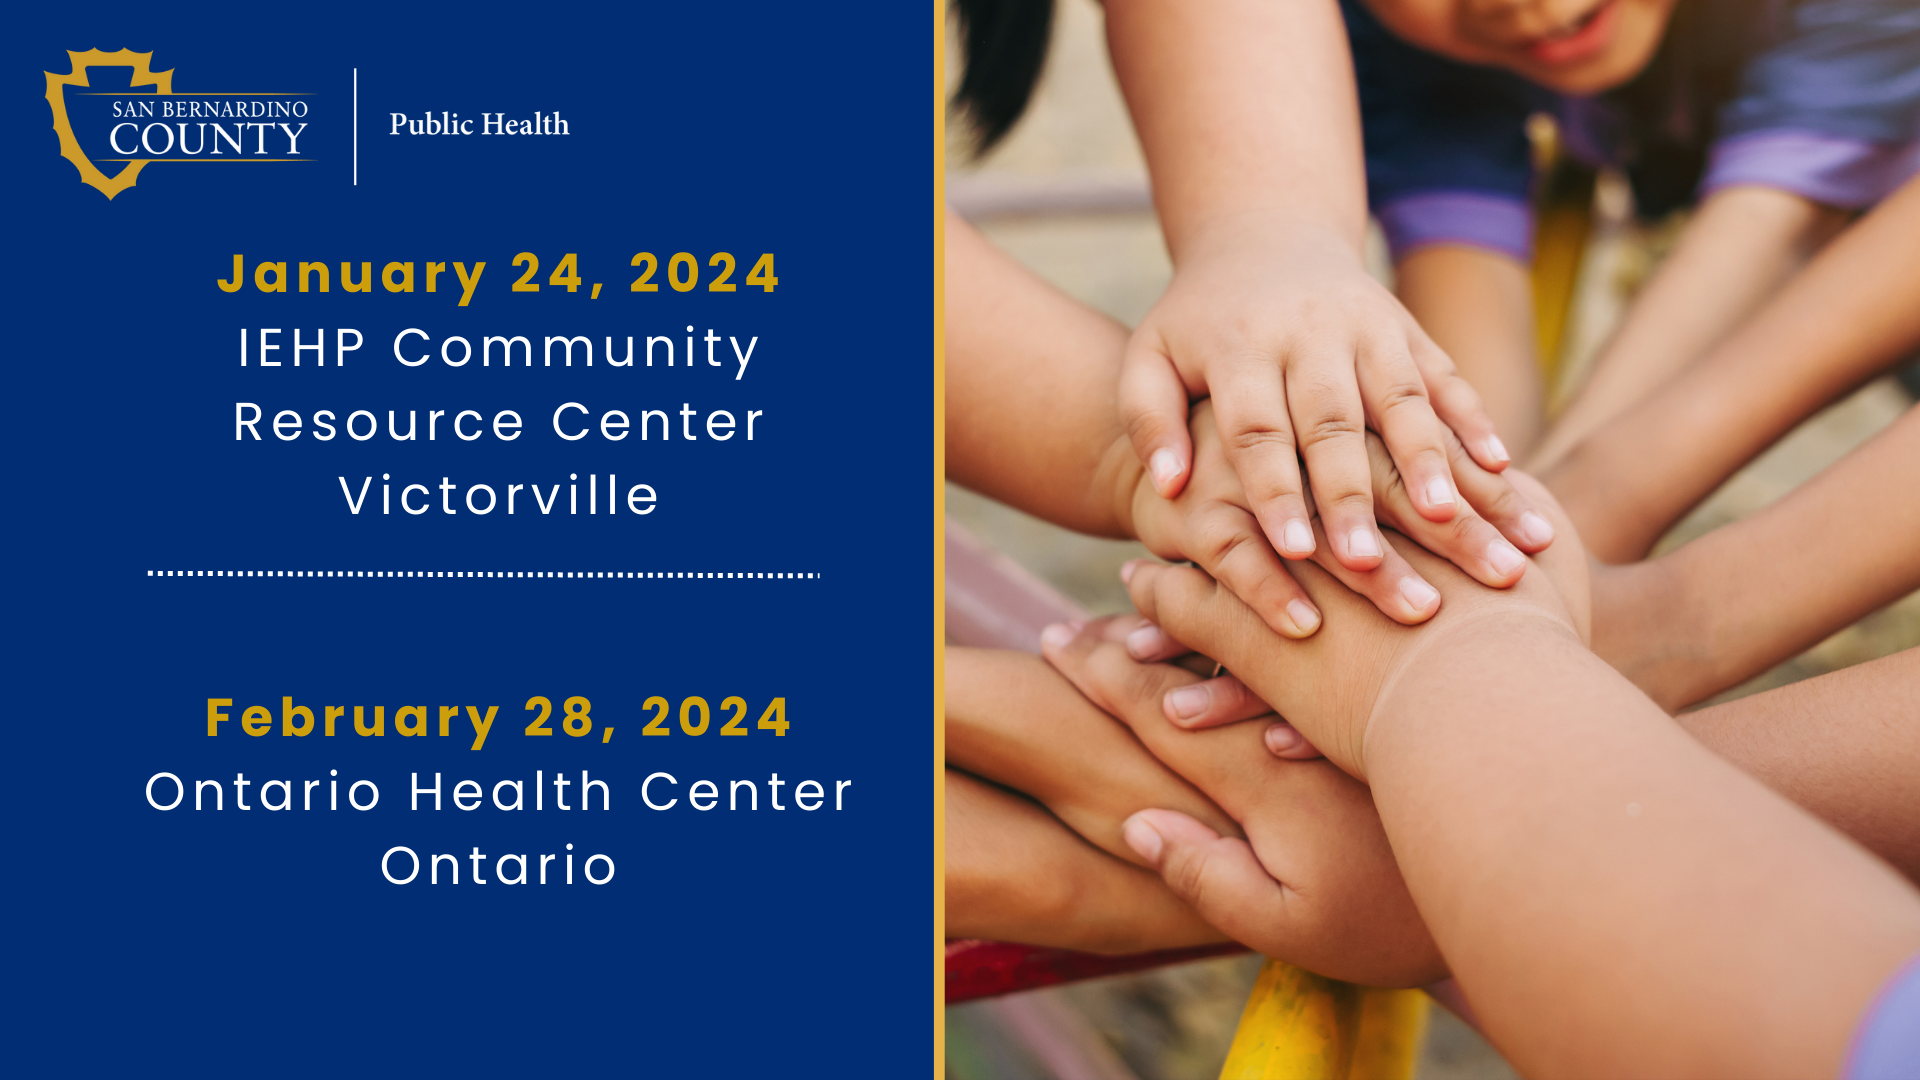 January 24, 2024 IEHP community Resource Center Victorville and February 28, 2024 Ontario Health Center Ontario Flyer